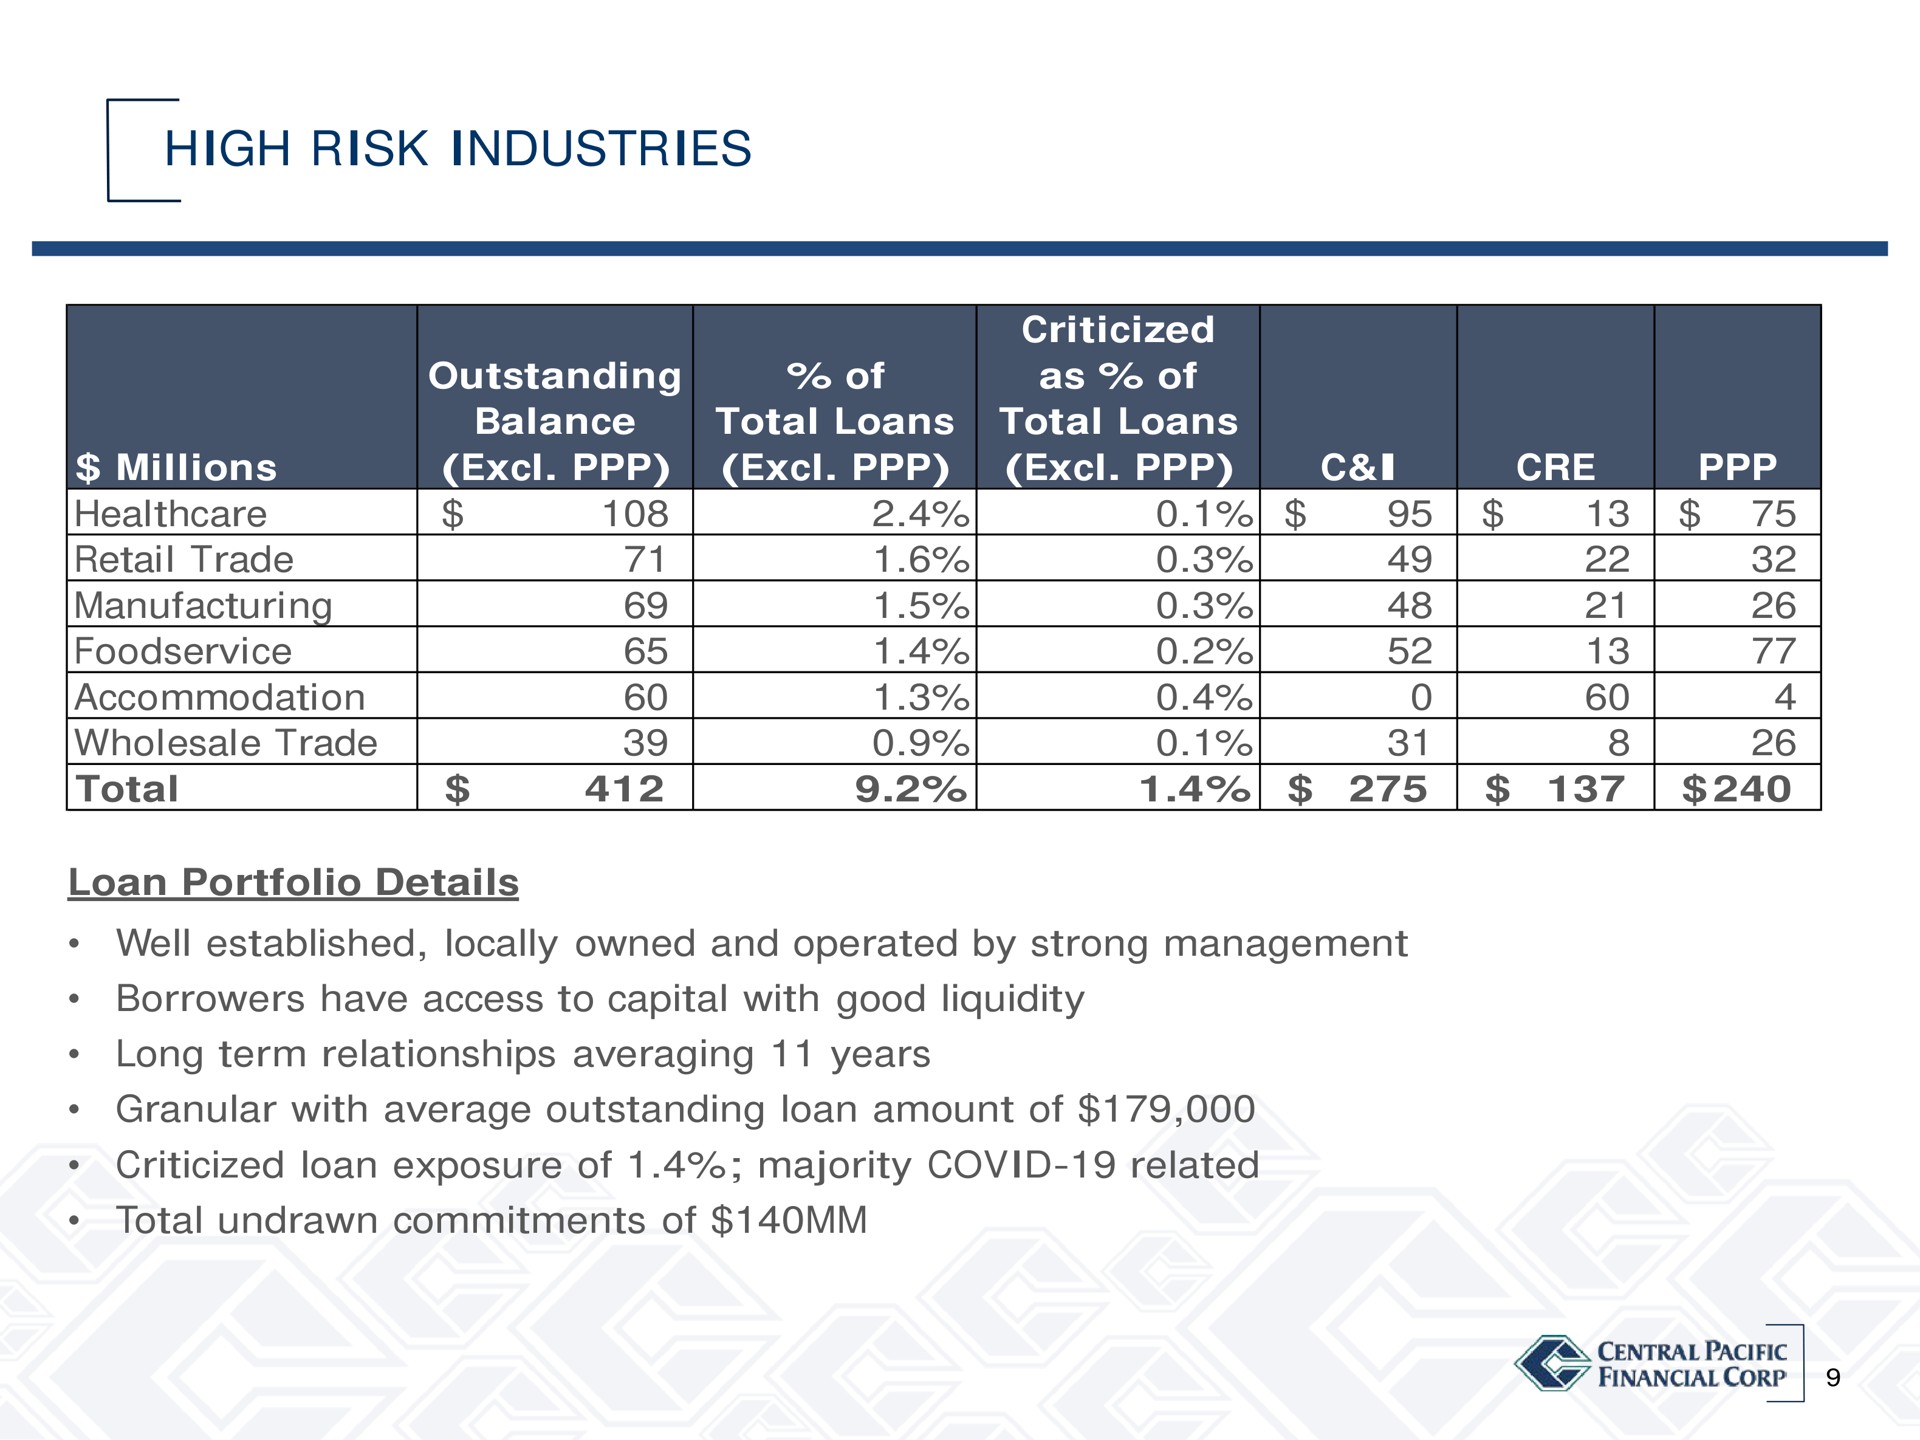 high risk industries go retail trade manufacturing accommodation total loan portfolio details | Central Pacific Financial